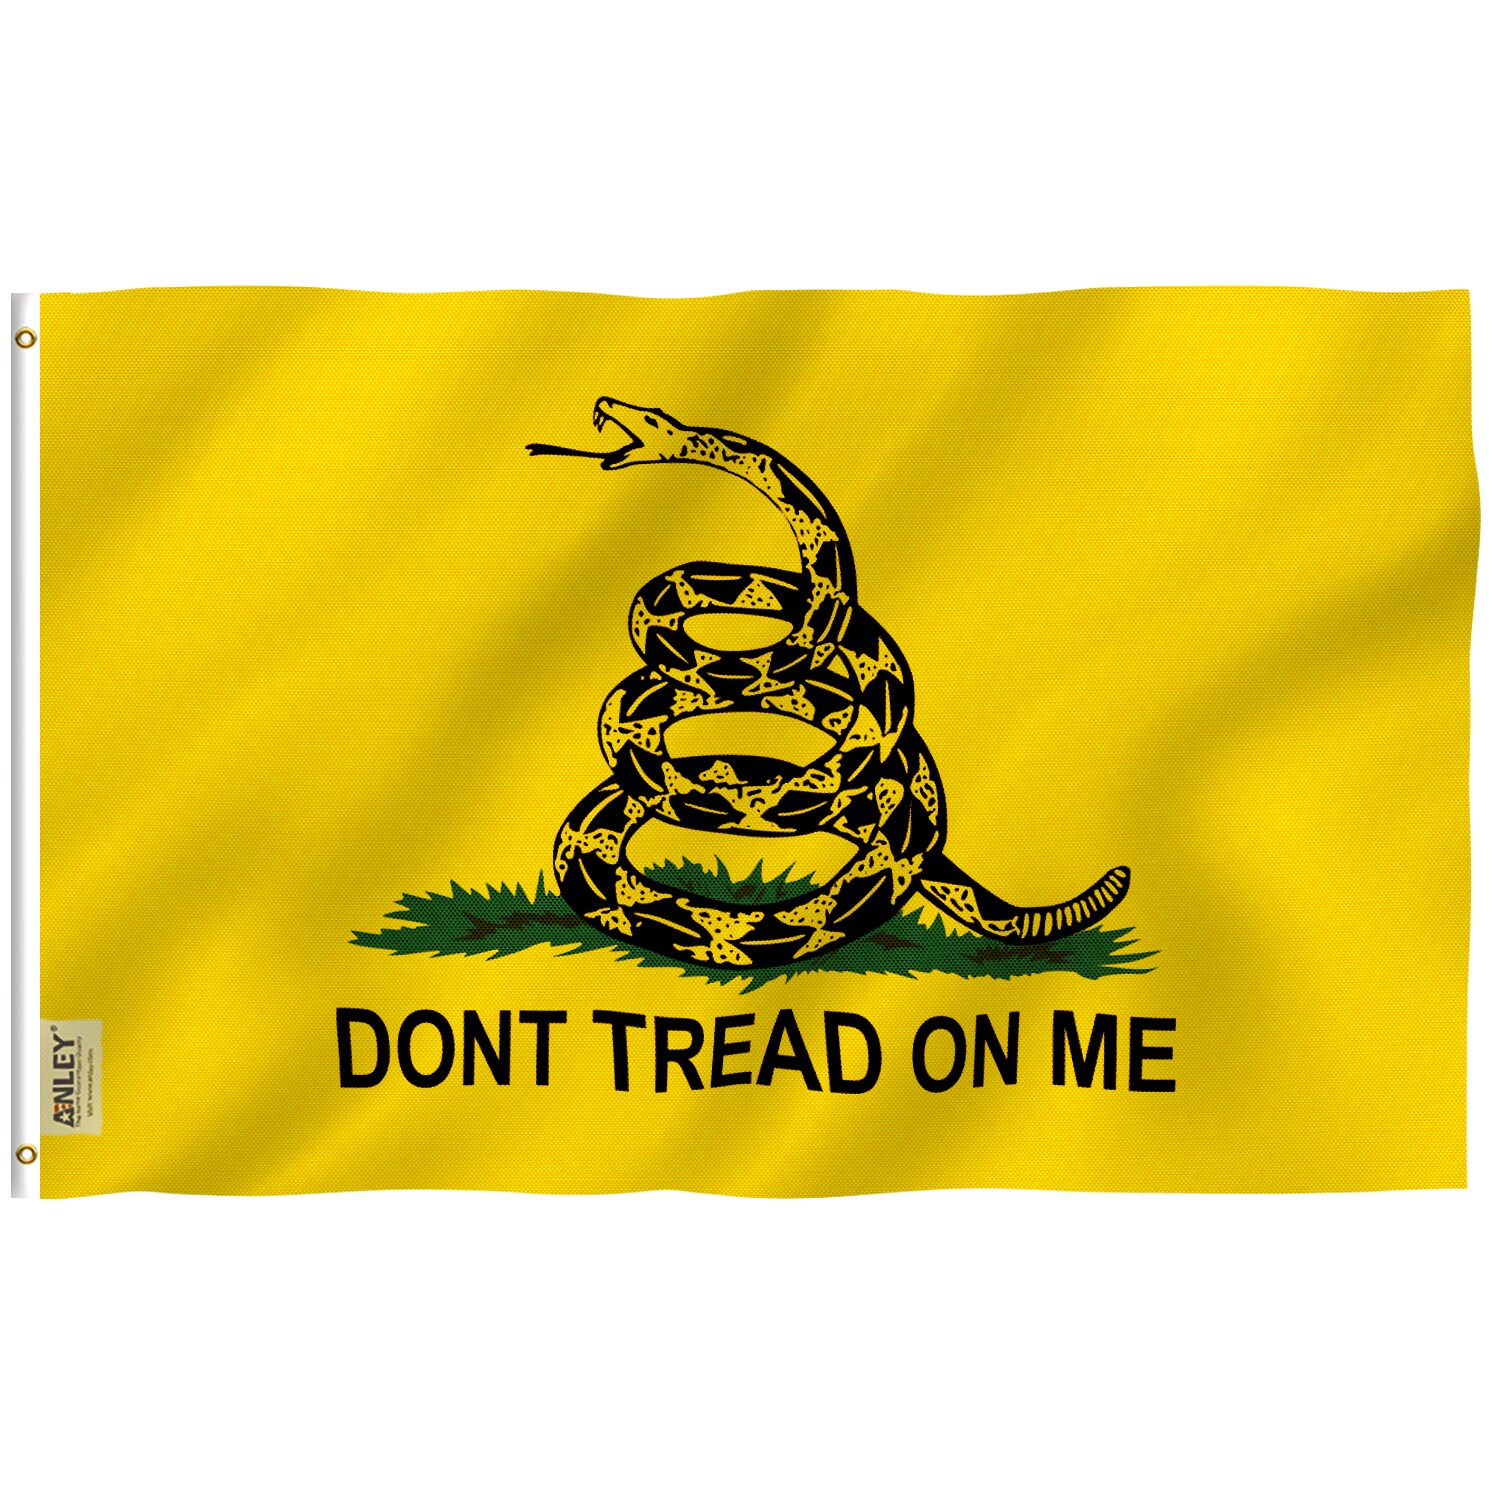 DONT TREAD ON ME DOUBLE SIDED OUTDOOR GADSDEN FLAG SEWN DETAILS TEA PARTY 